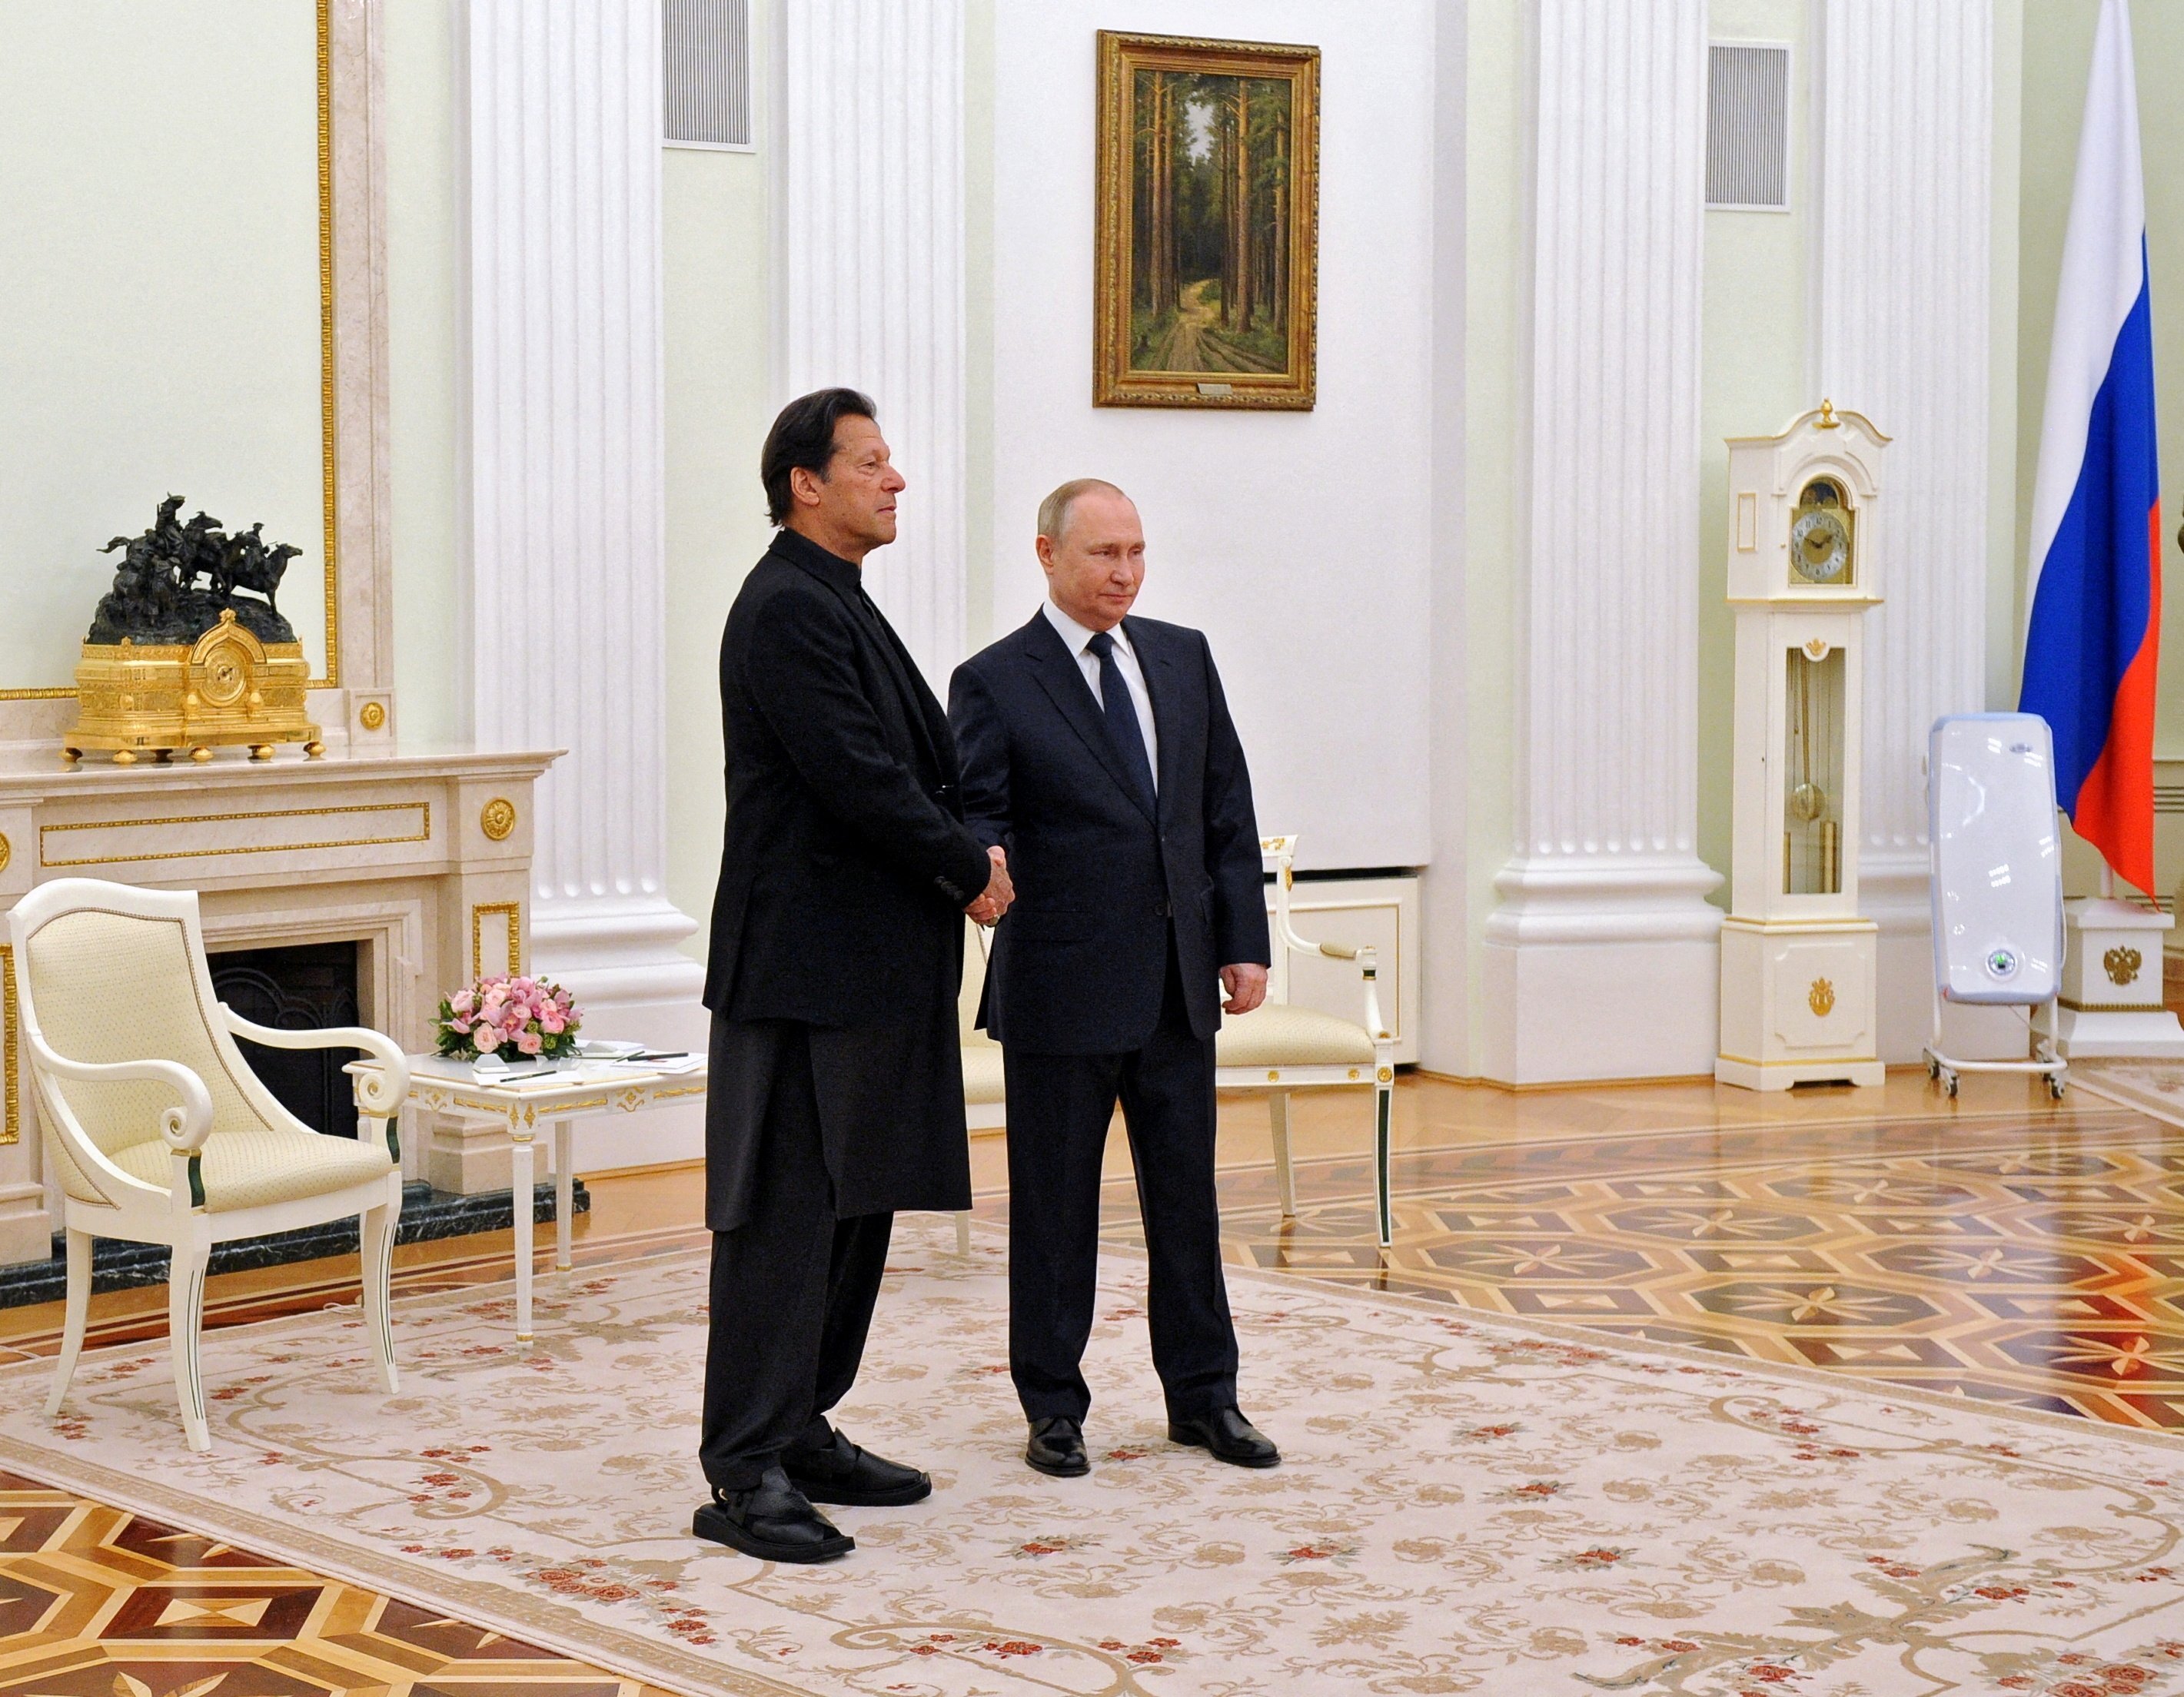 Pakistan’s Prime Minister Imran Khan meets Russian President Vladimir Putin on February 24. The timing of Khan’s visit to Moscow has strained Islamabad’s relations with the West. Photo: Reuters